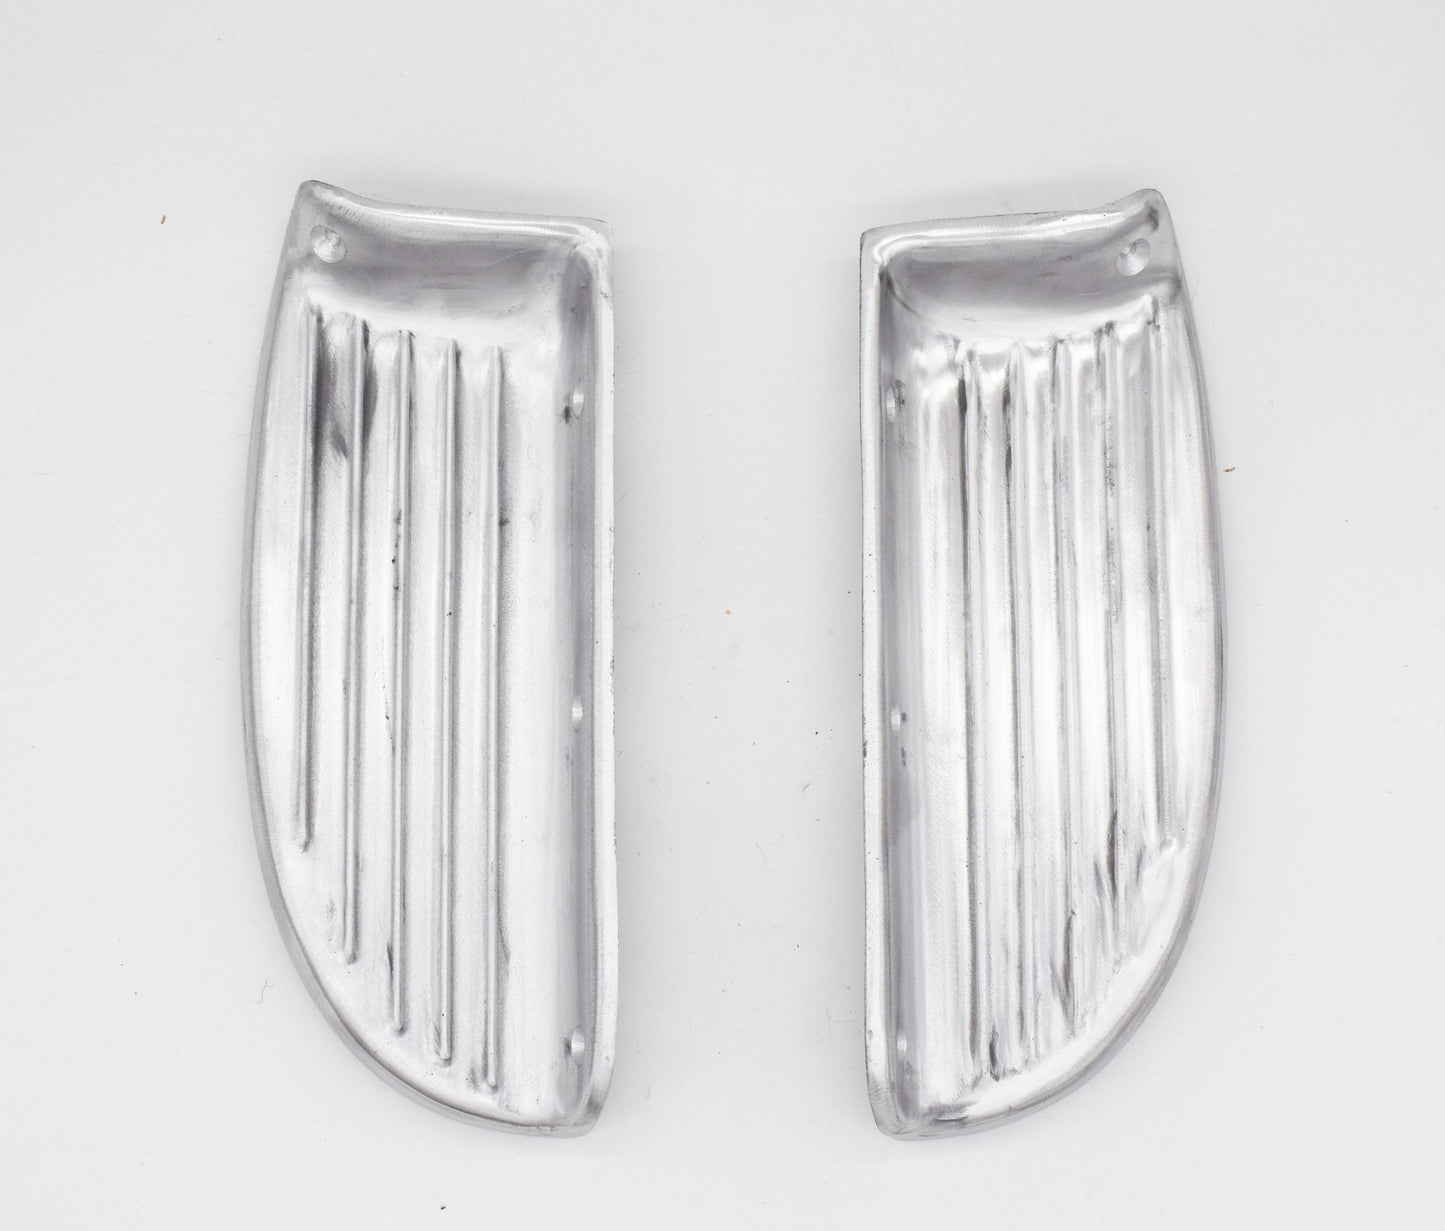 Rear Fender Lower Step Plates, 1948-1951 Willys Jeepster - The JeepsterMan